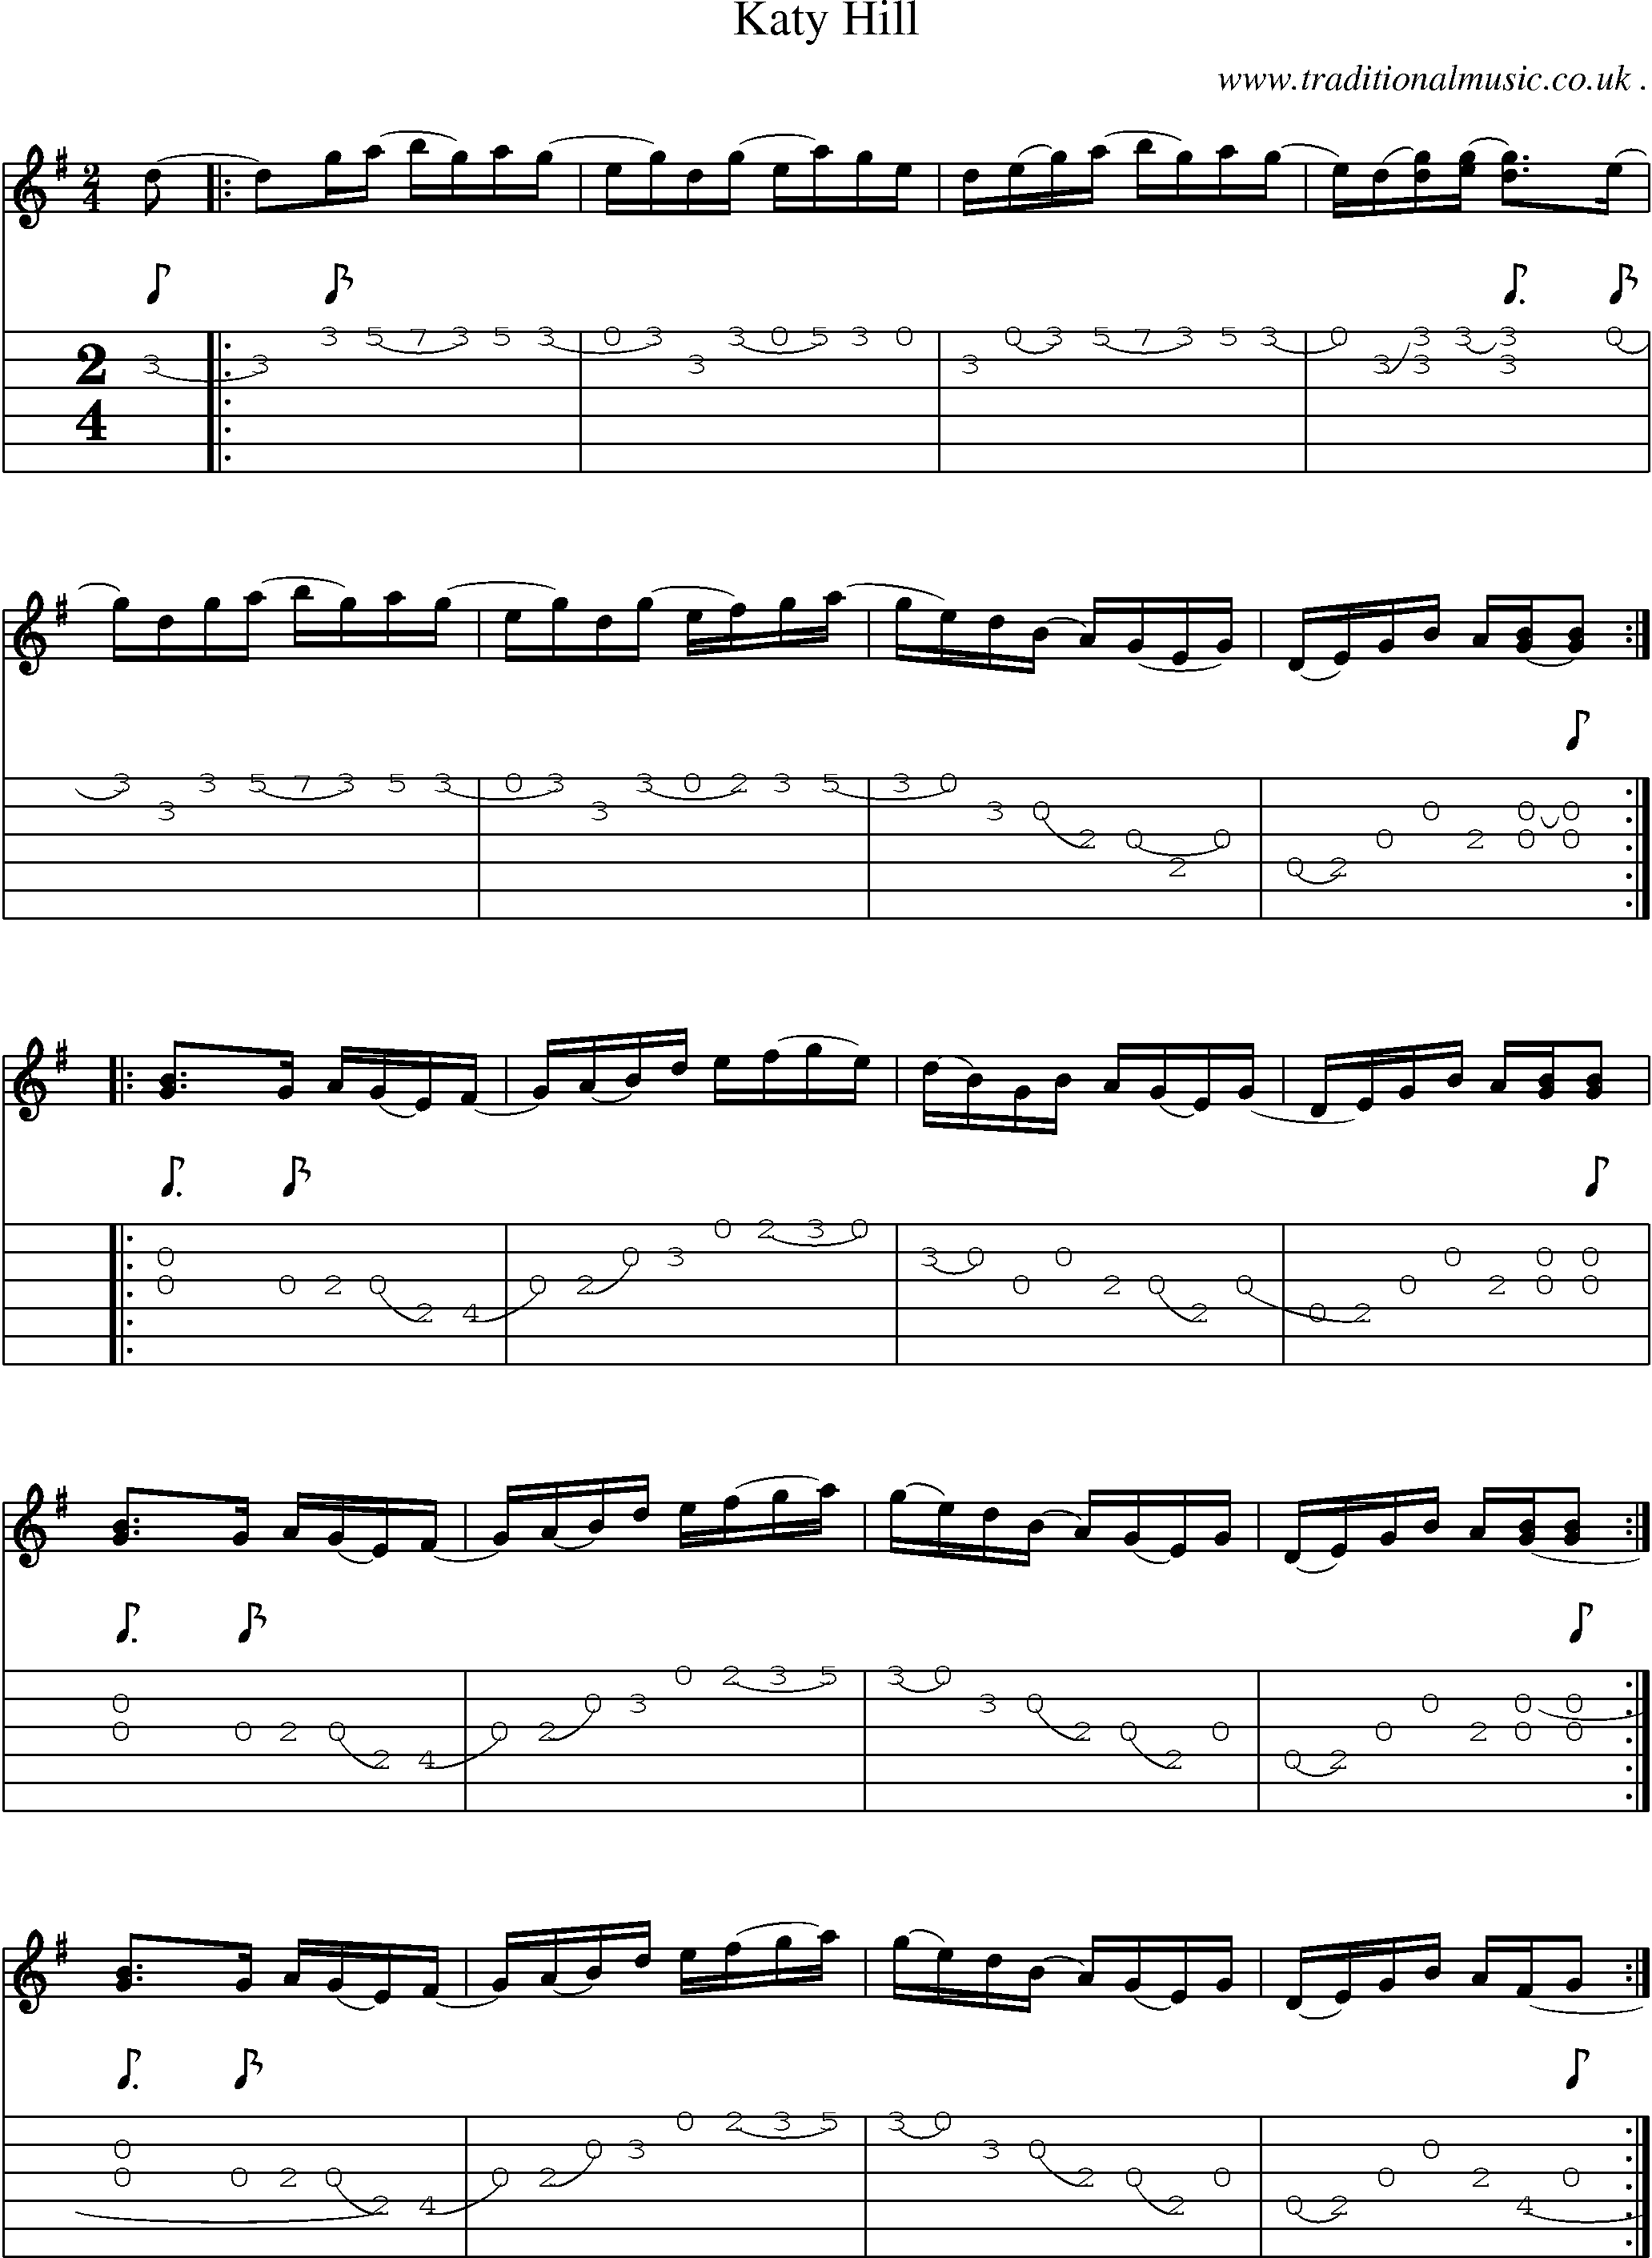 Music Score and Guitar Tabs for Katy Hill